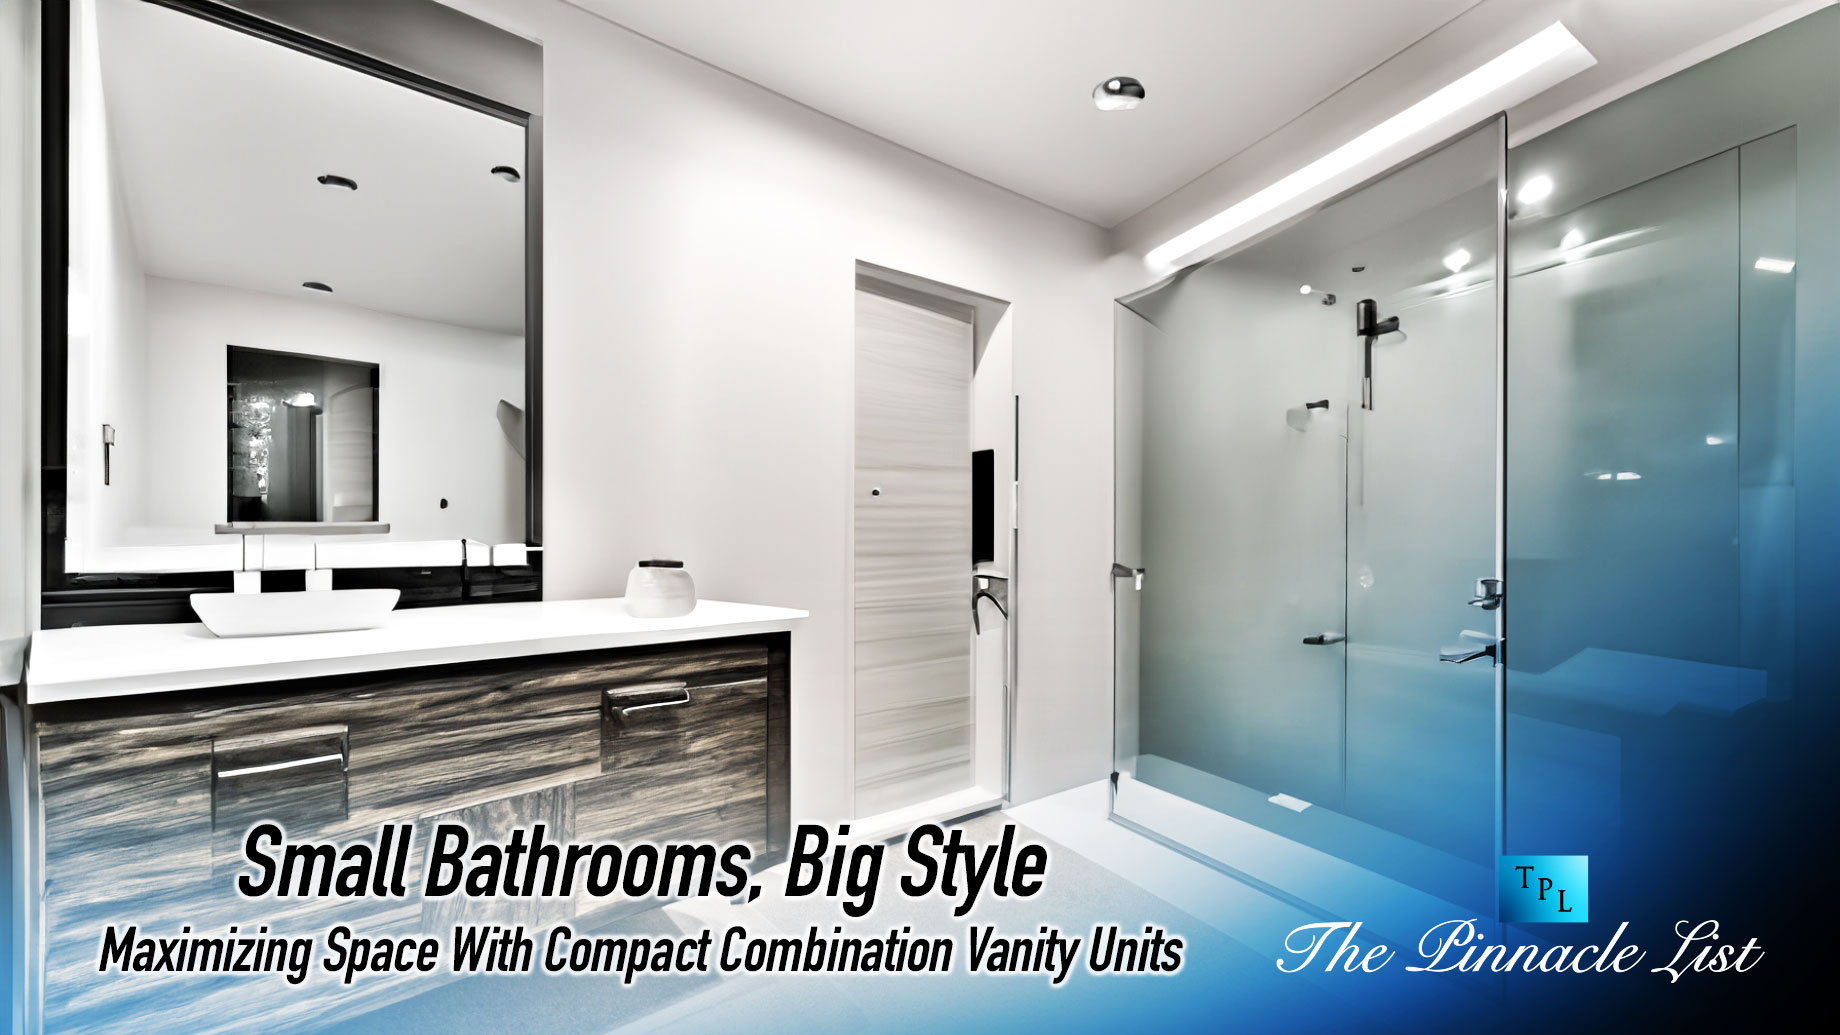 Small Bathrooms, Big Style: Maximizing Space With Compact Combination Vanity Units